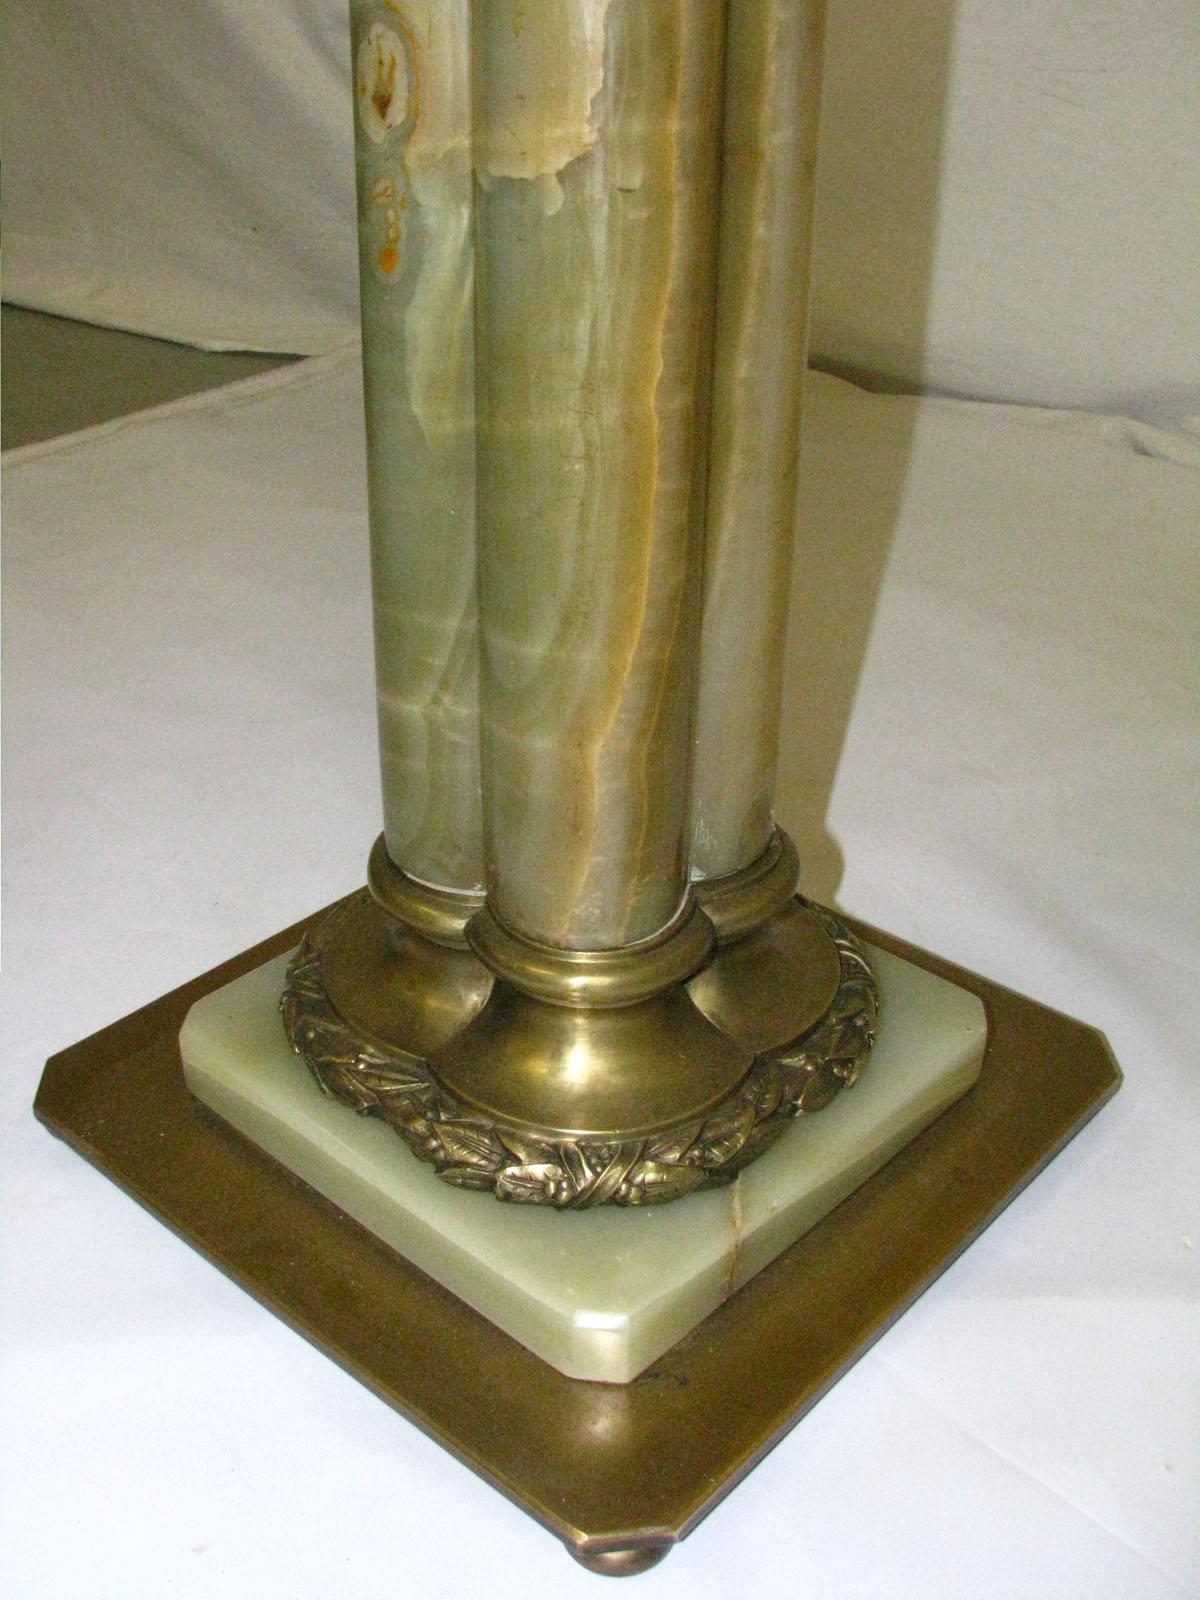 Polished Green Onyx Column / Pedestal, 20th Century For Sale 6